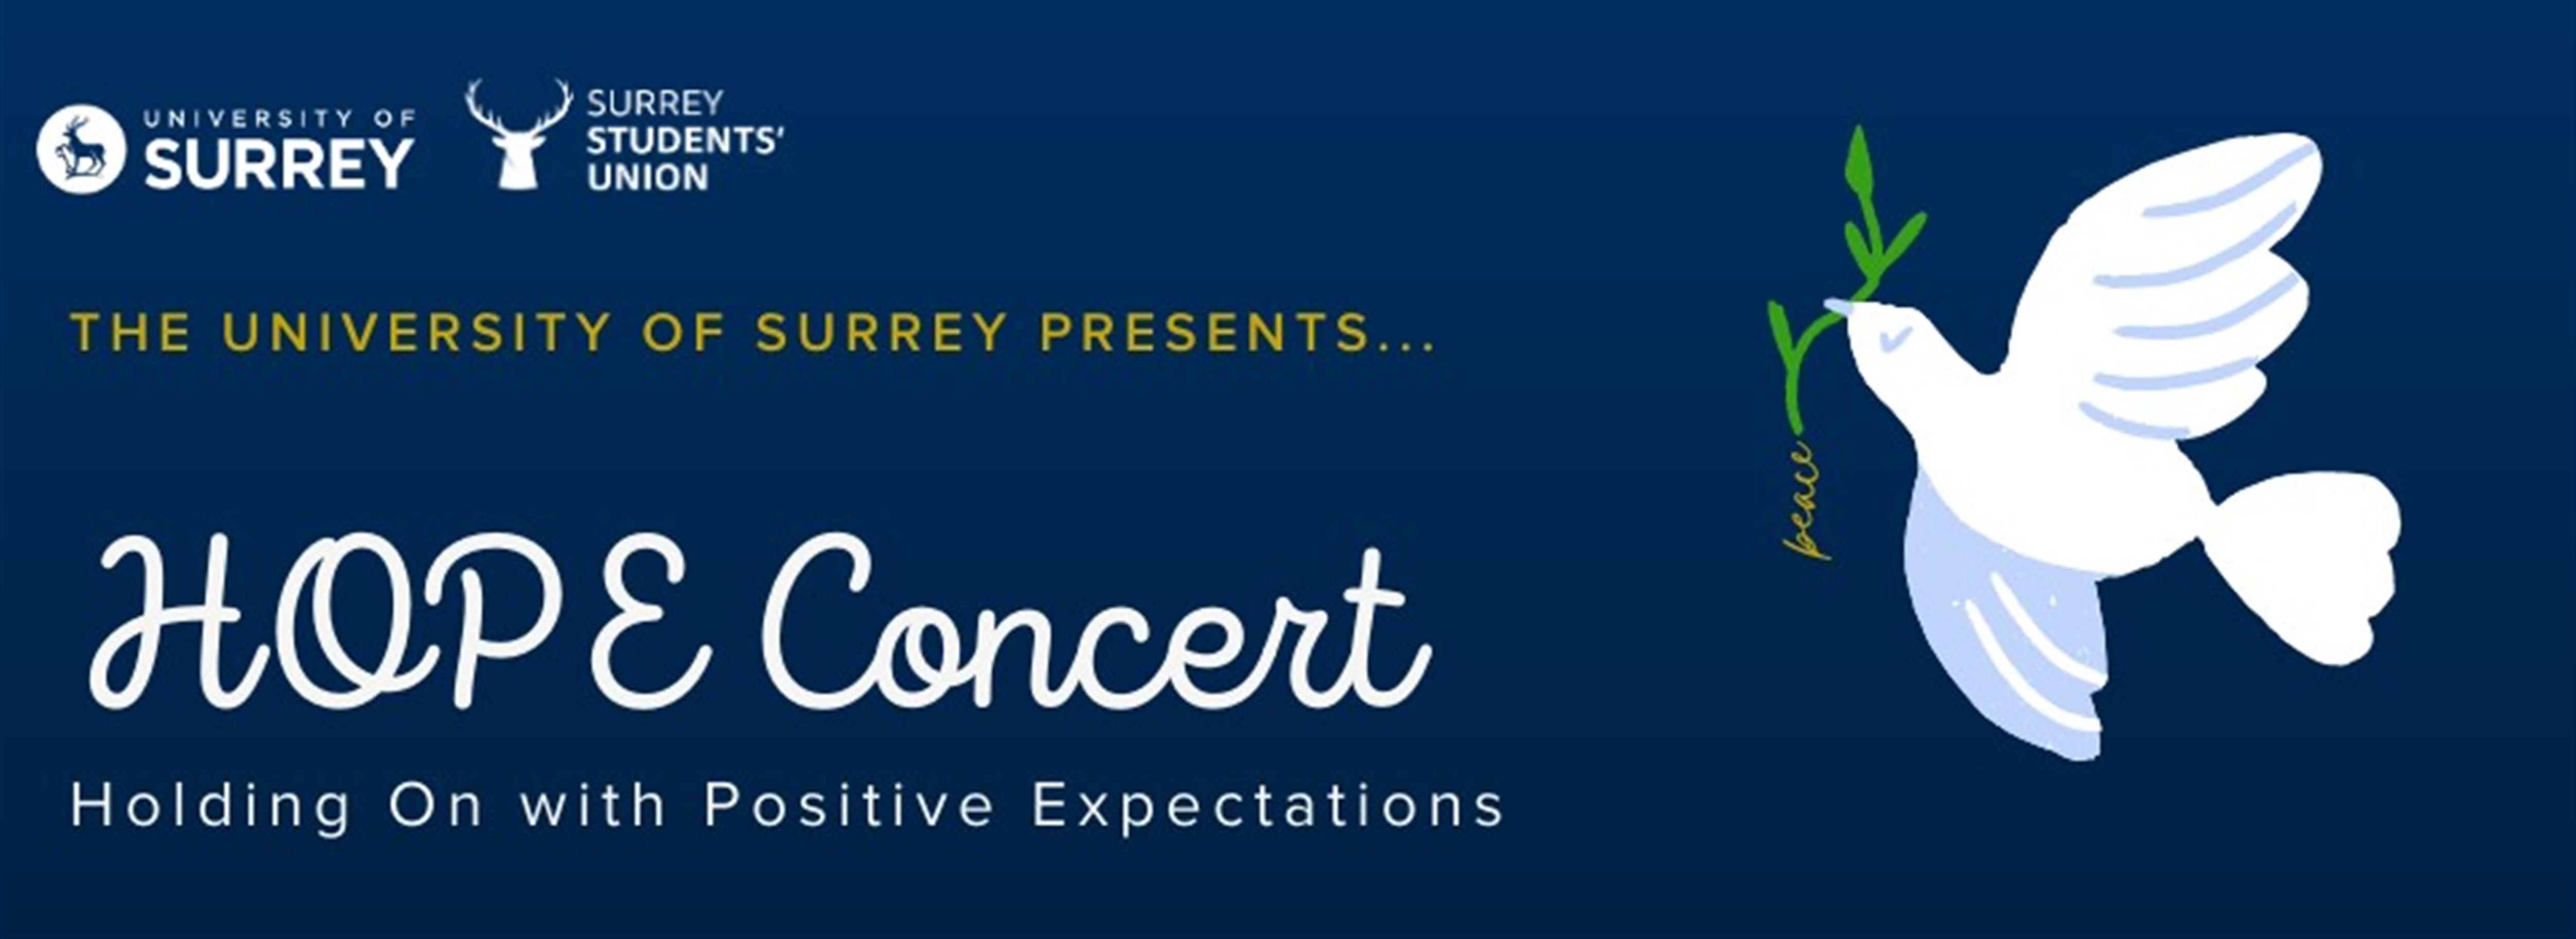 HOPE Concert - Holding On With Positive Expectations